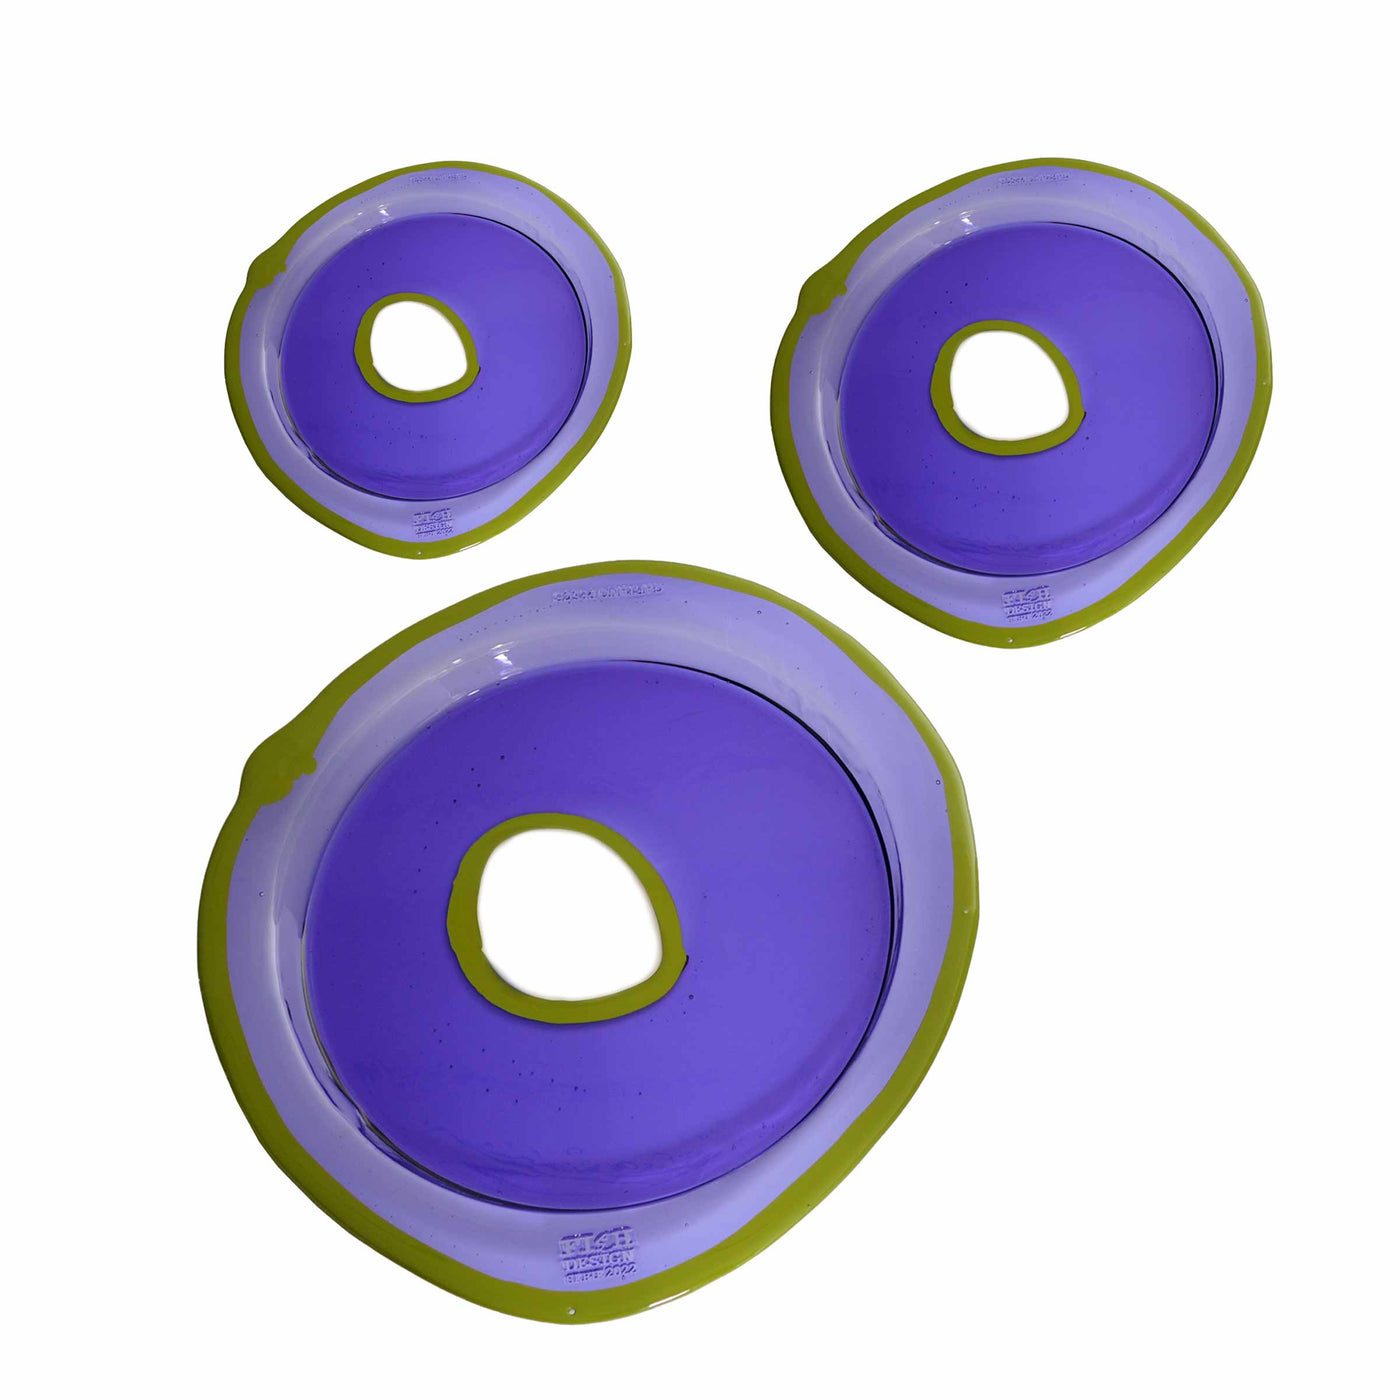 Resin Round Tray TRY-TRAY Purple by Gaetano Pesce for Fish Design 01